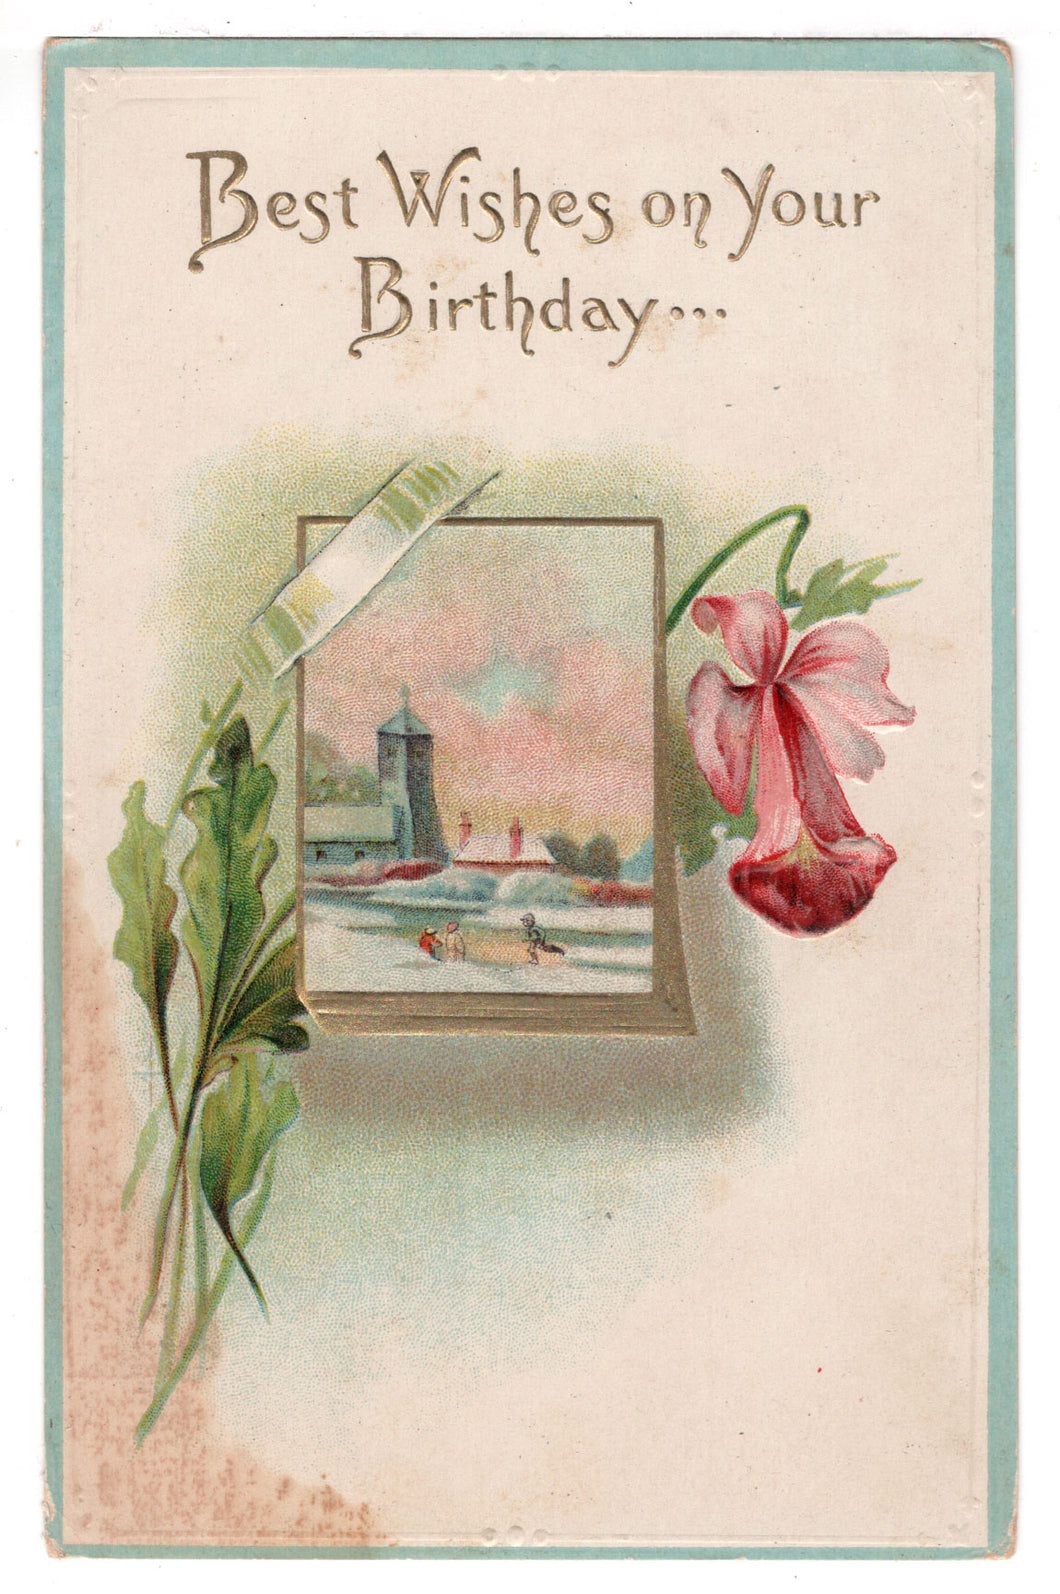 Best Wishes On Your Birthday Vintage Original Postcard # 4554 - Early 1900's